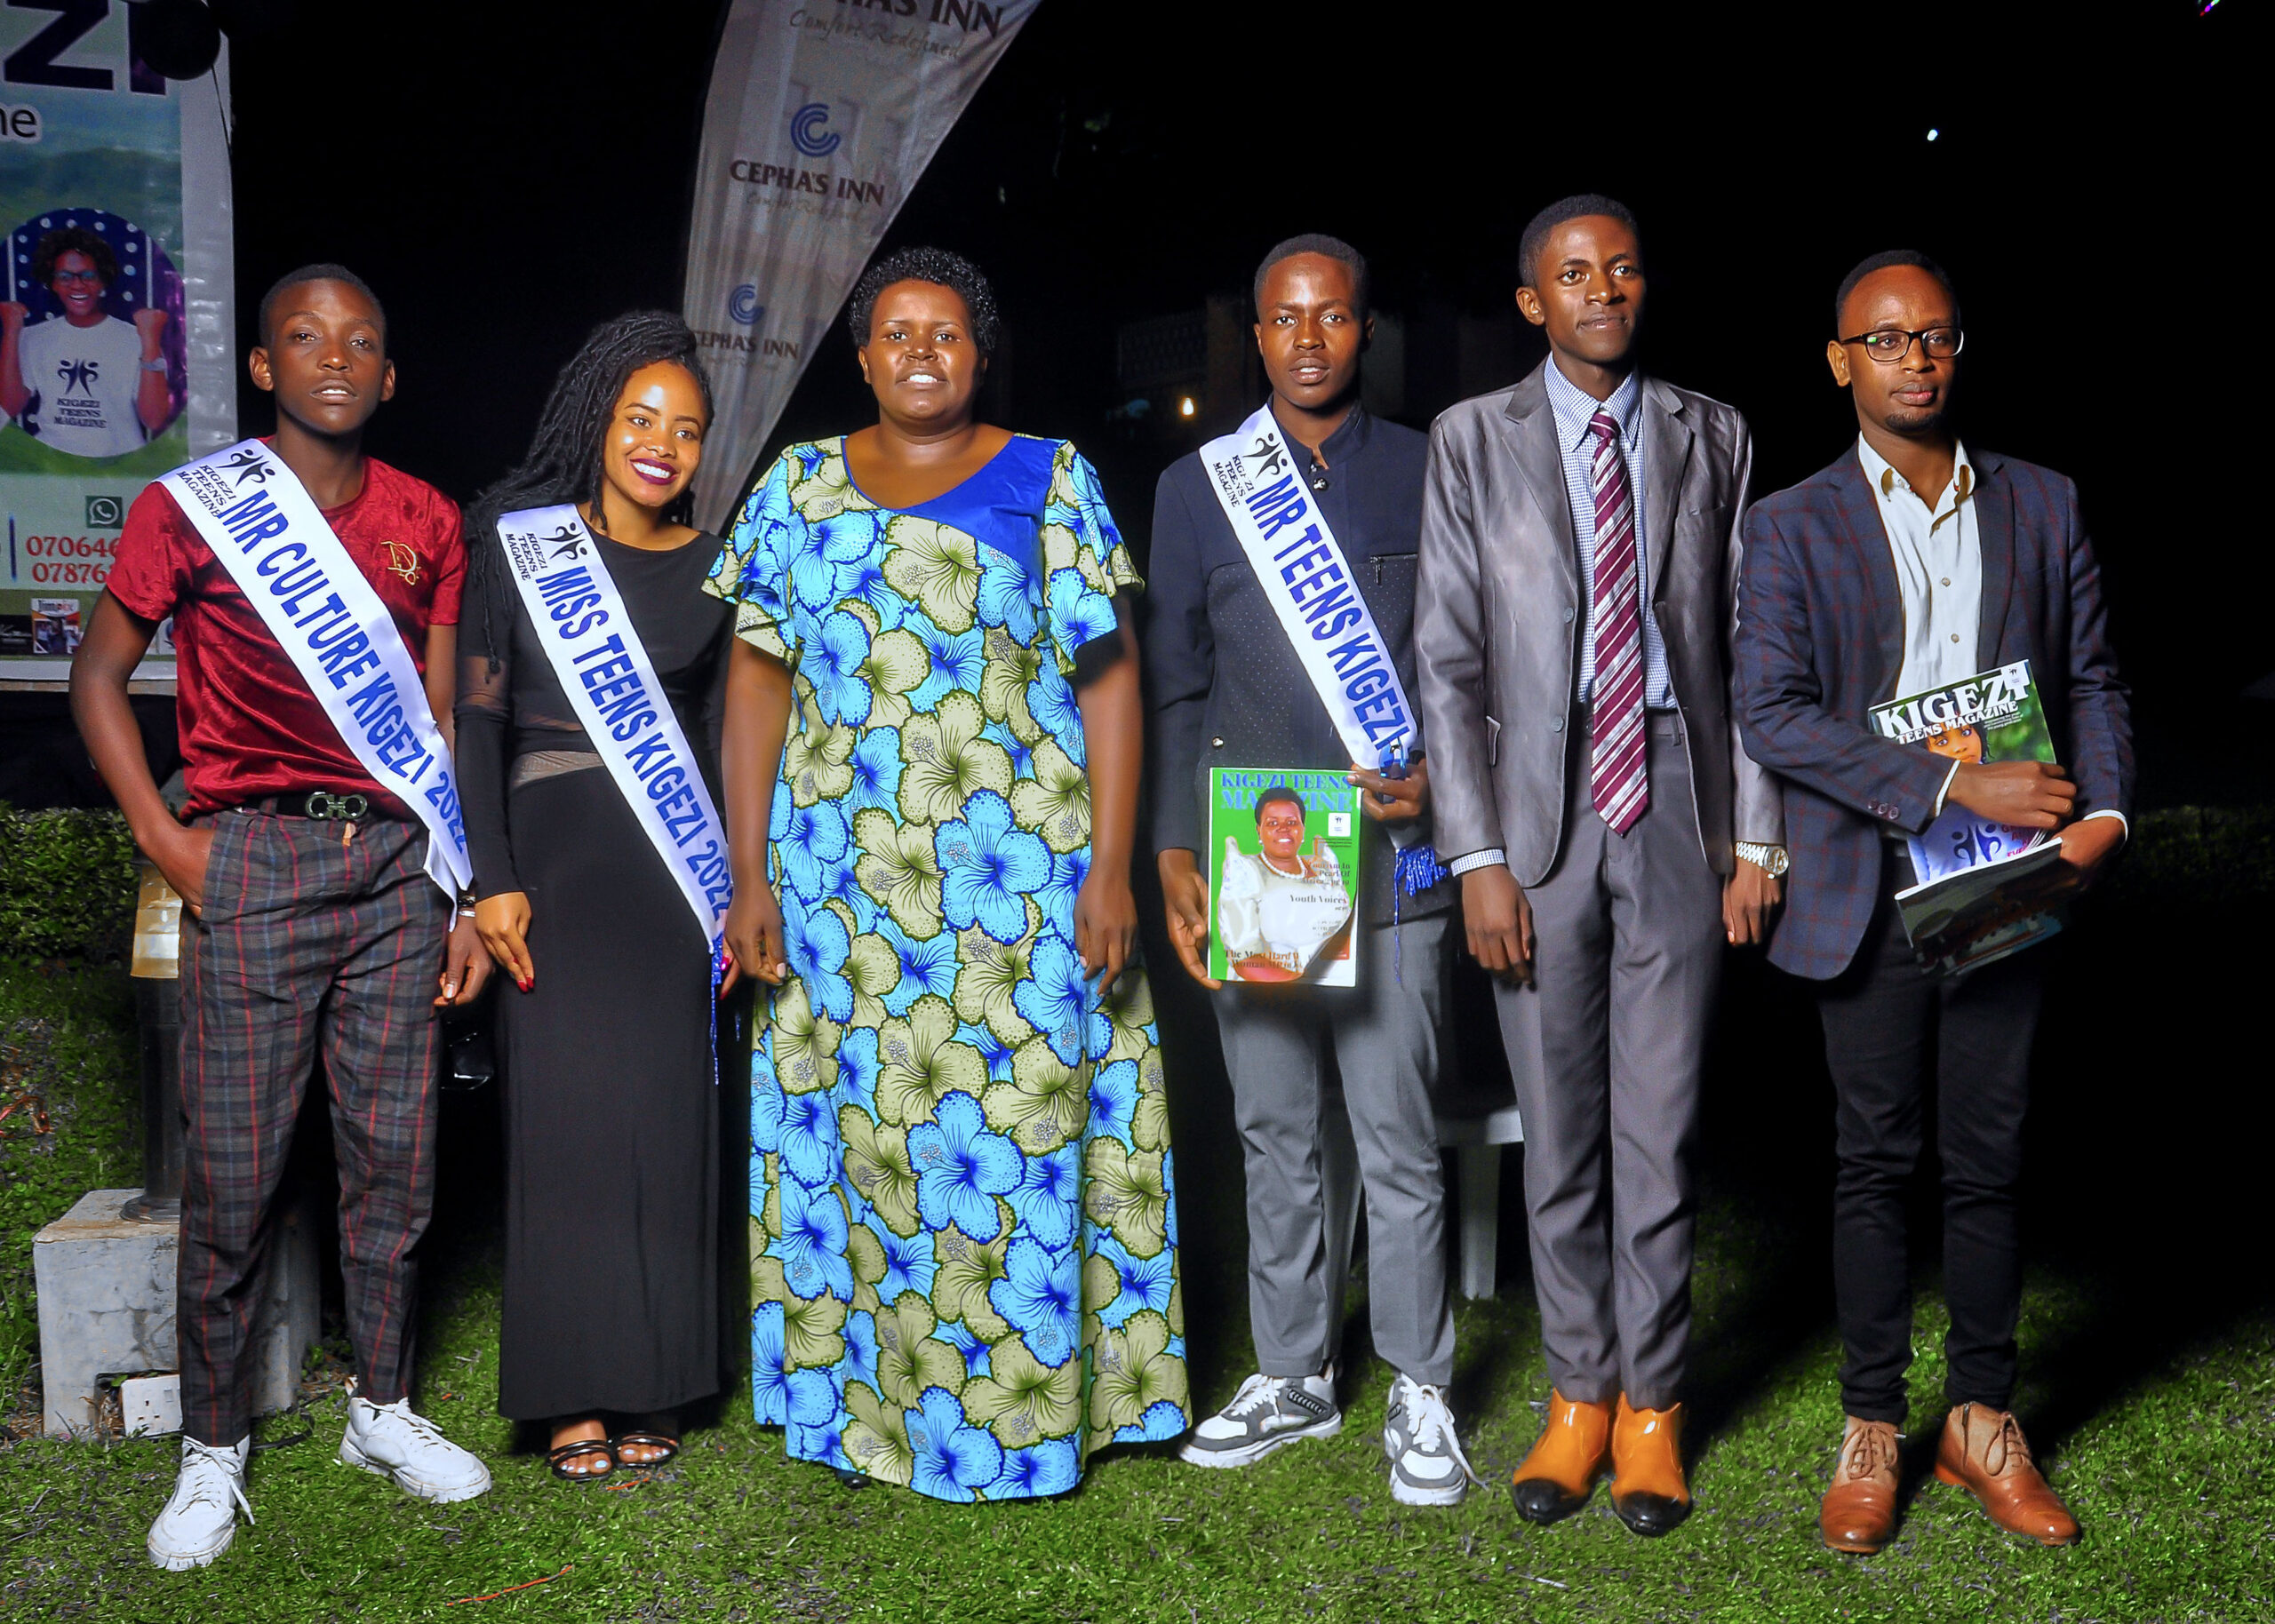 HONPROSSY COMMISIONER OF PARLIAMENT CROWNED THE CURRENT MISSMISS TEENS scaled